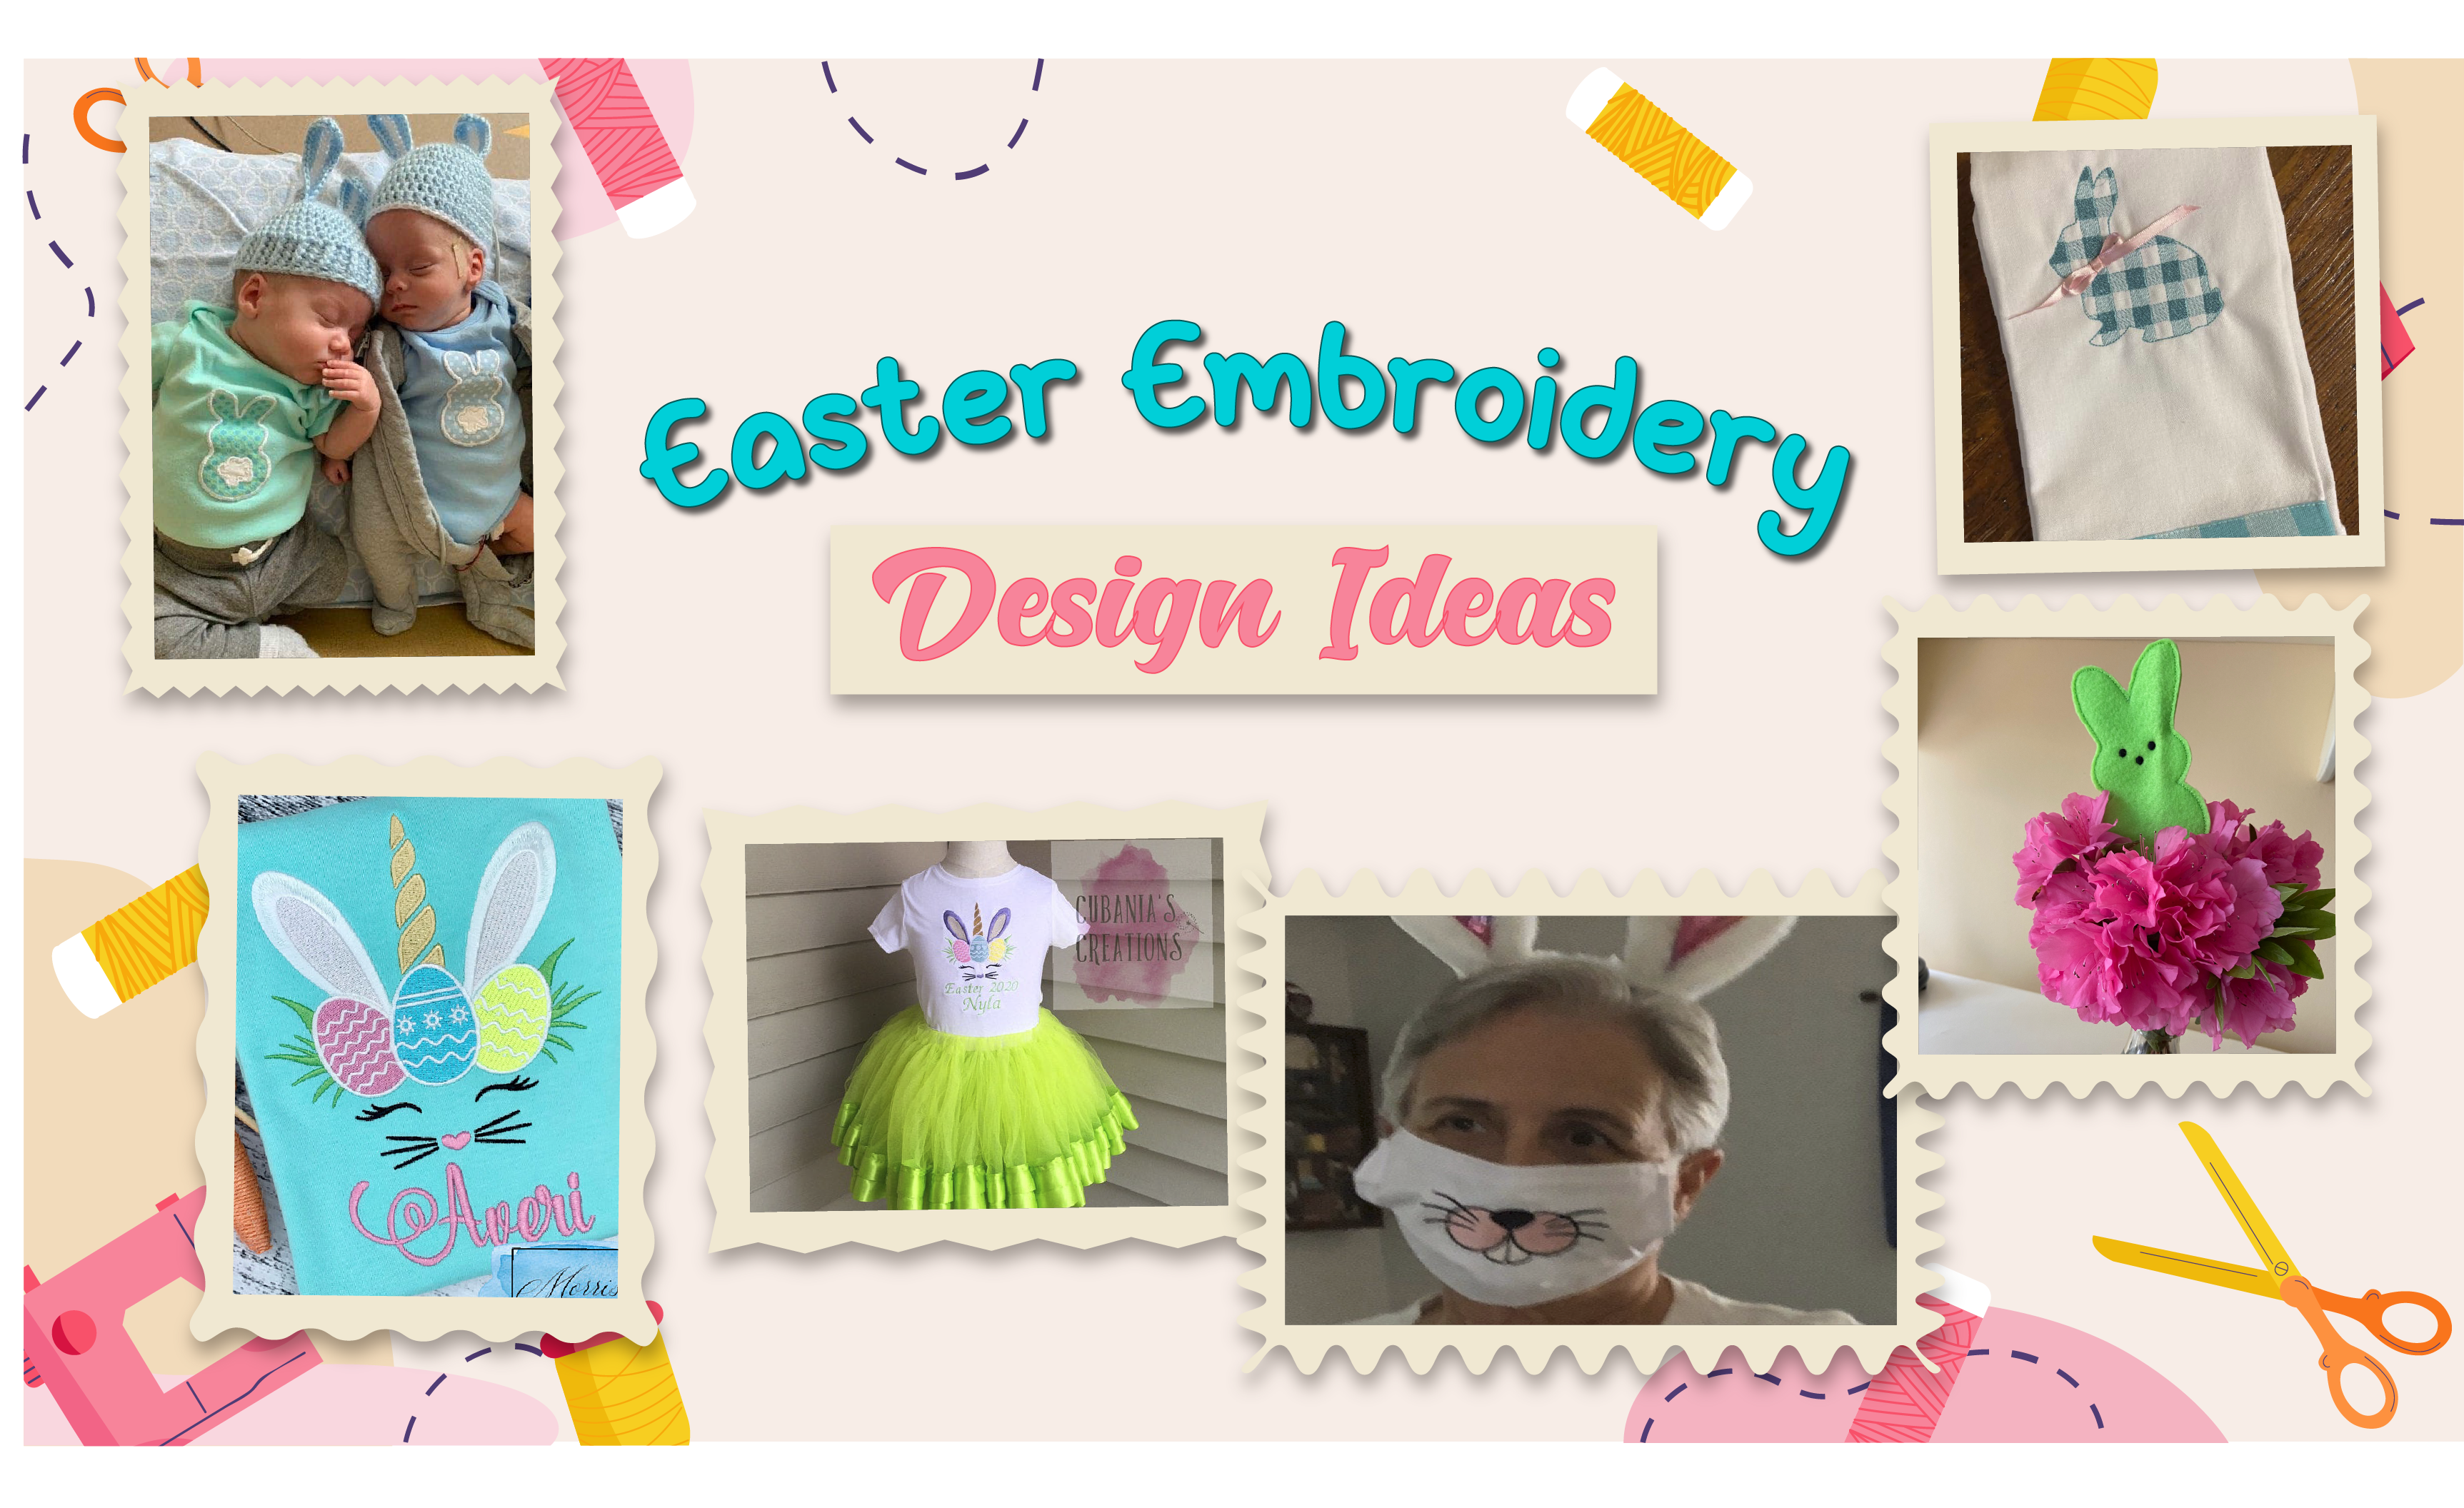 Easter Embroidery Design Ideas